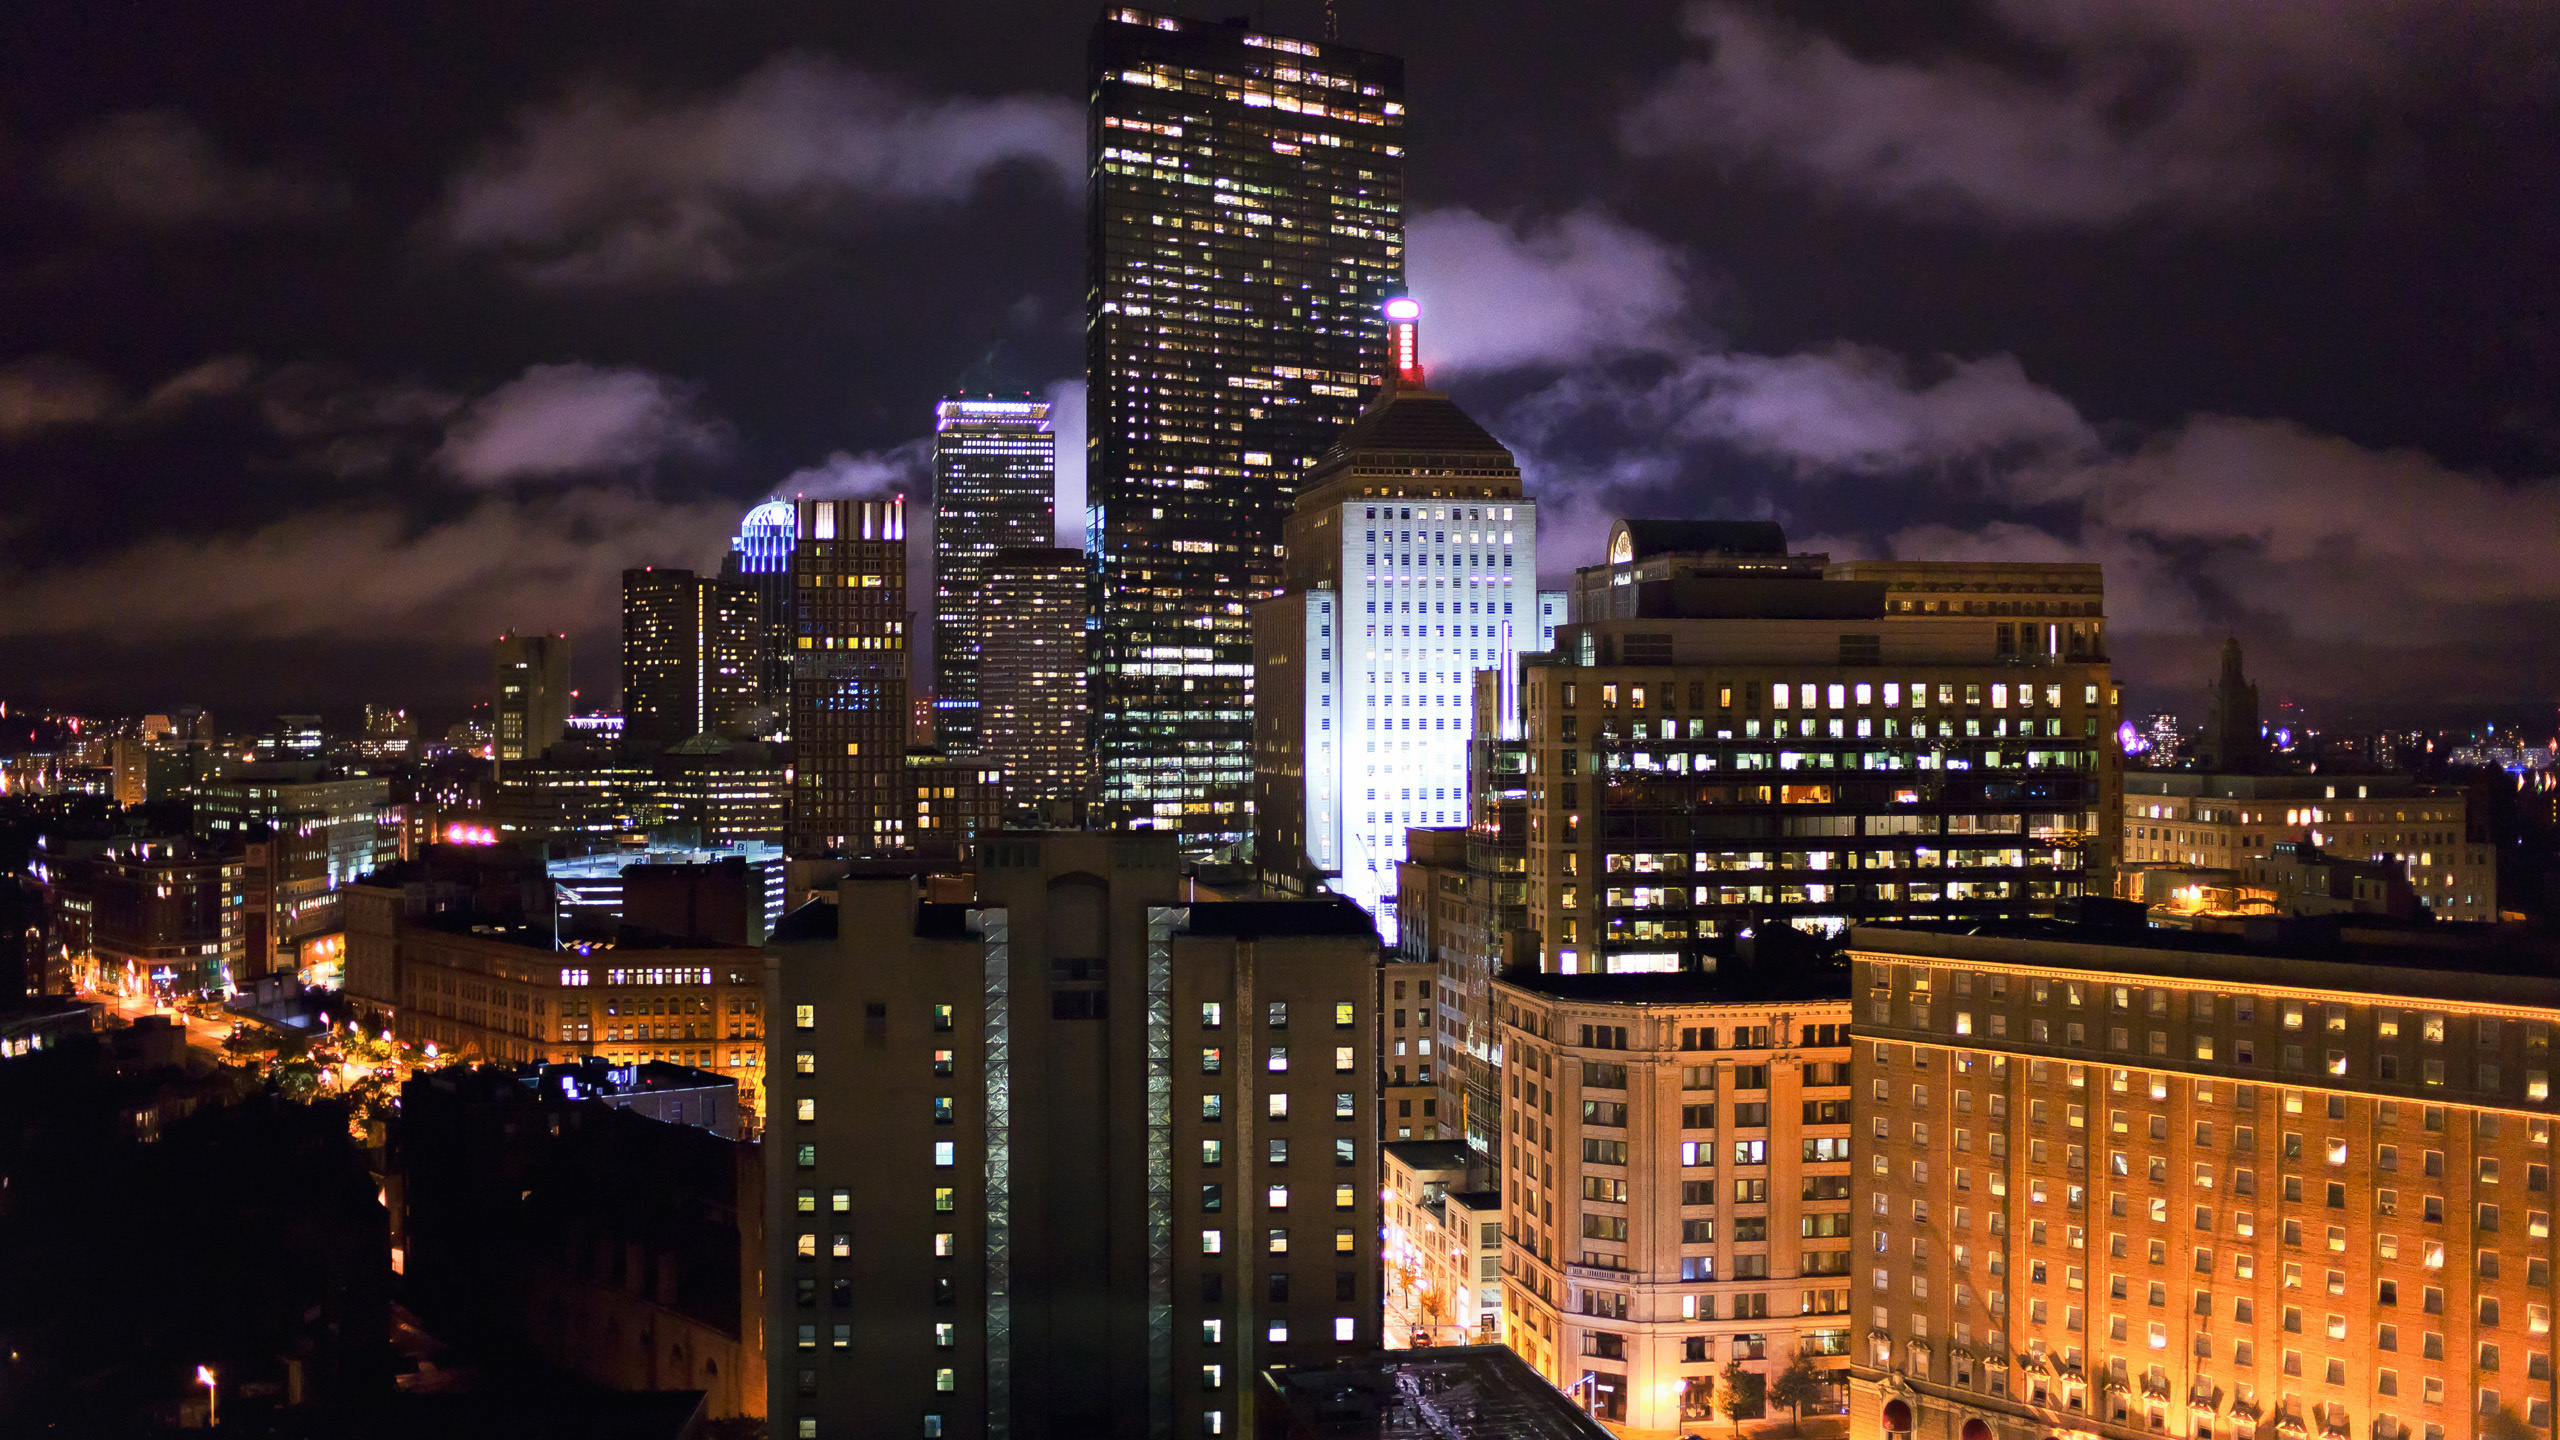 City Buildings Under Dark Cloudy Sky During Night Time. Wallpaper in 2560x1440 Resolution